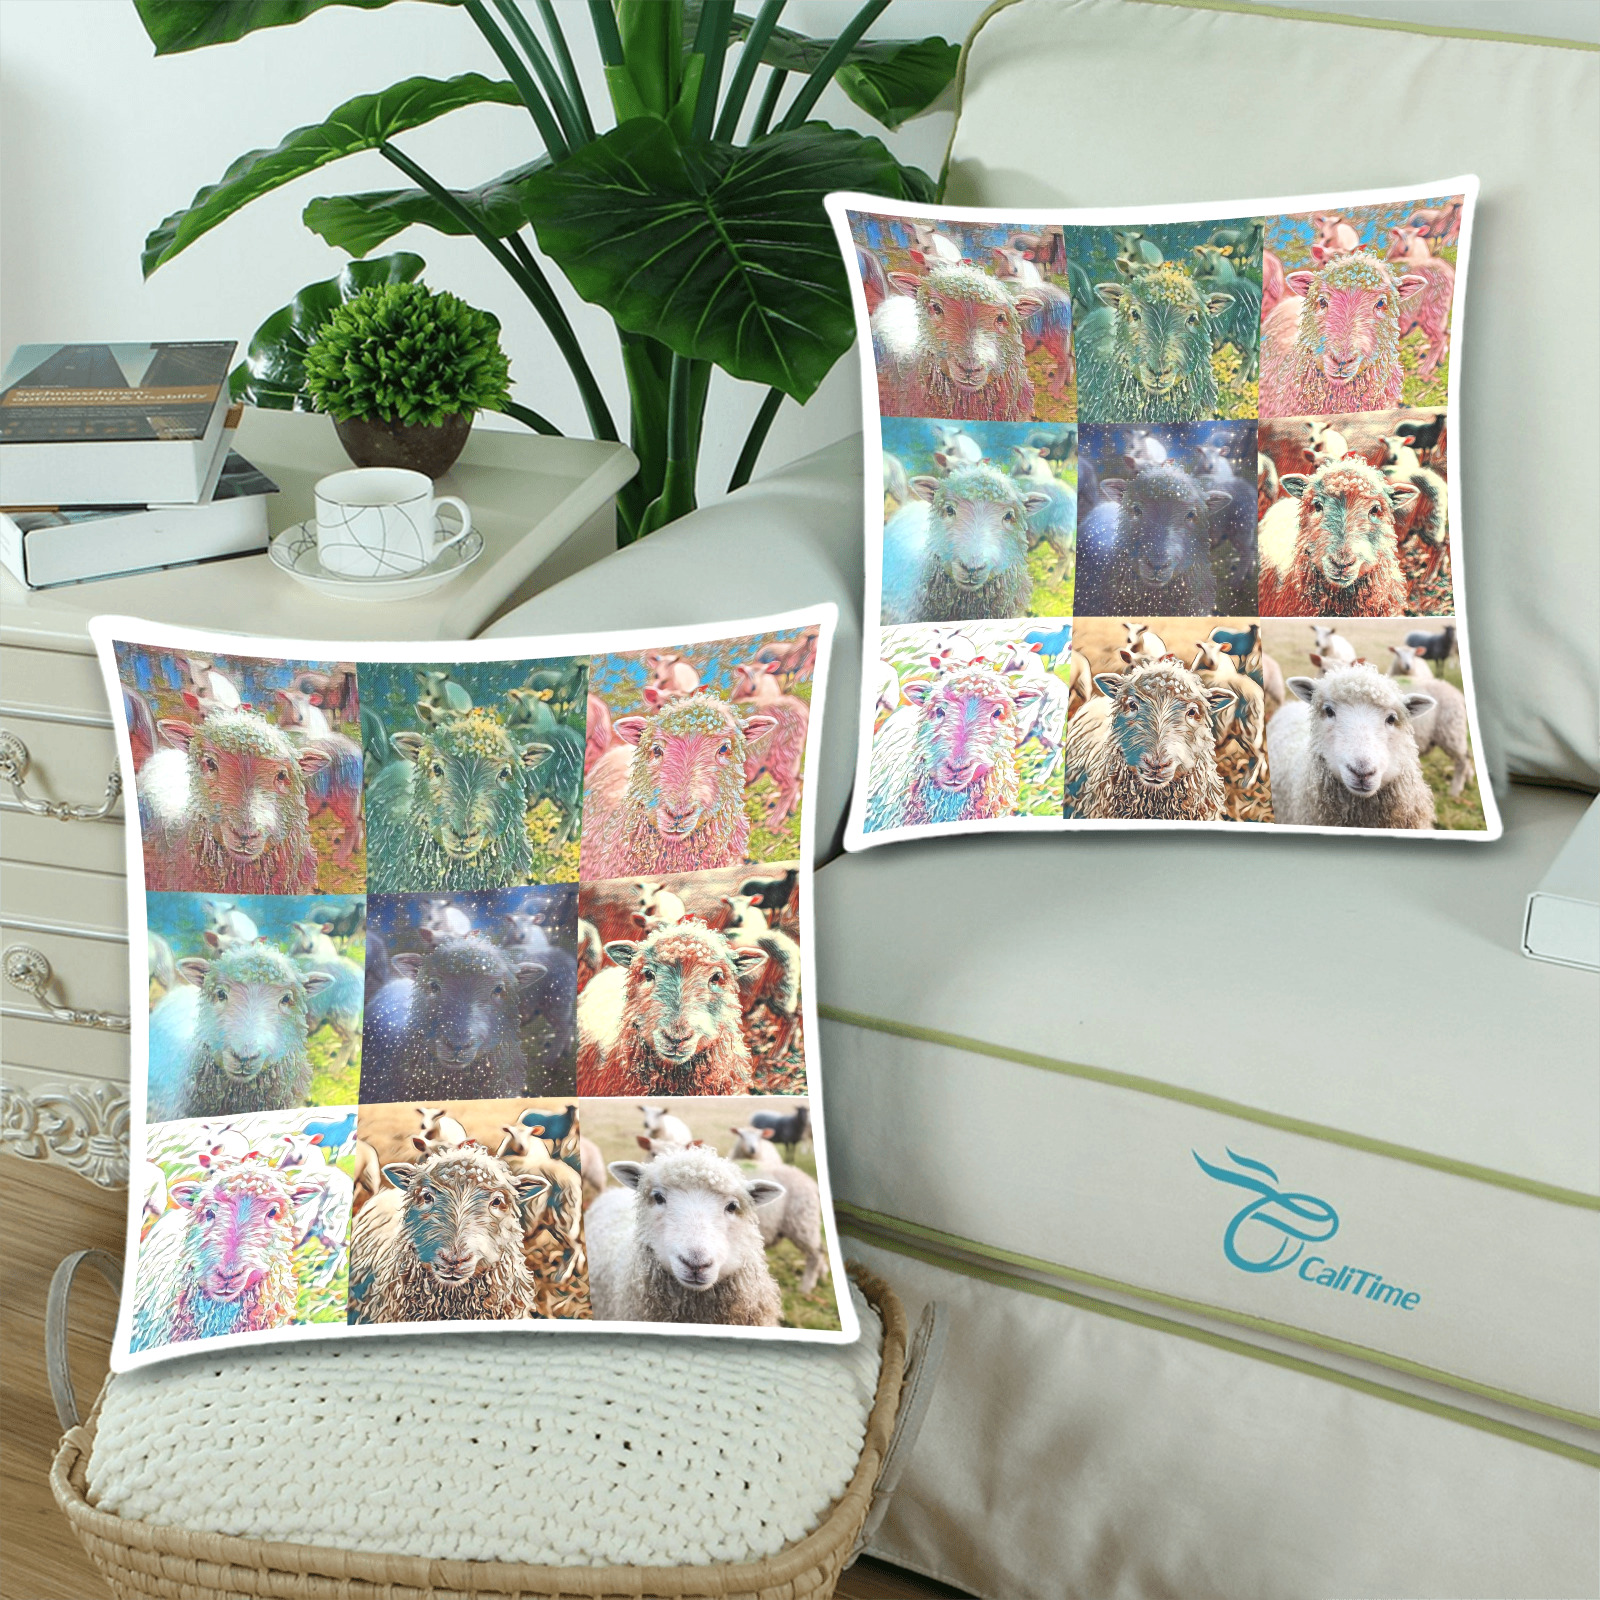 Sheep With Filters Collage Custom Zippered Pillow Cases 18"x 18" (Twin Sides) (Set of 2)